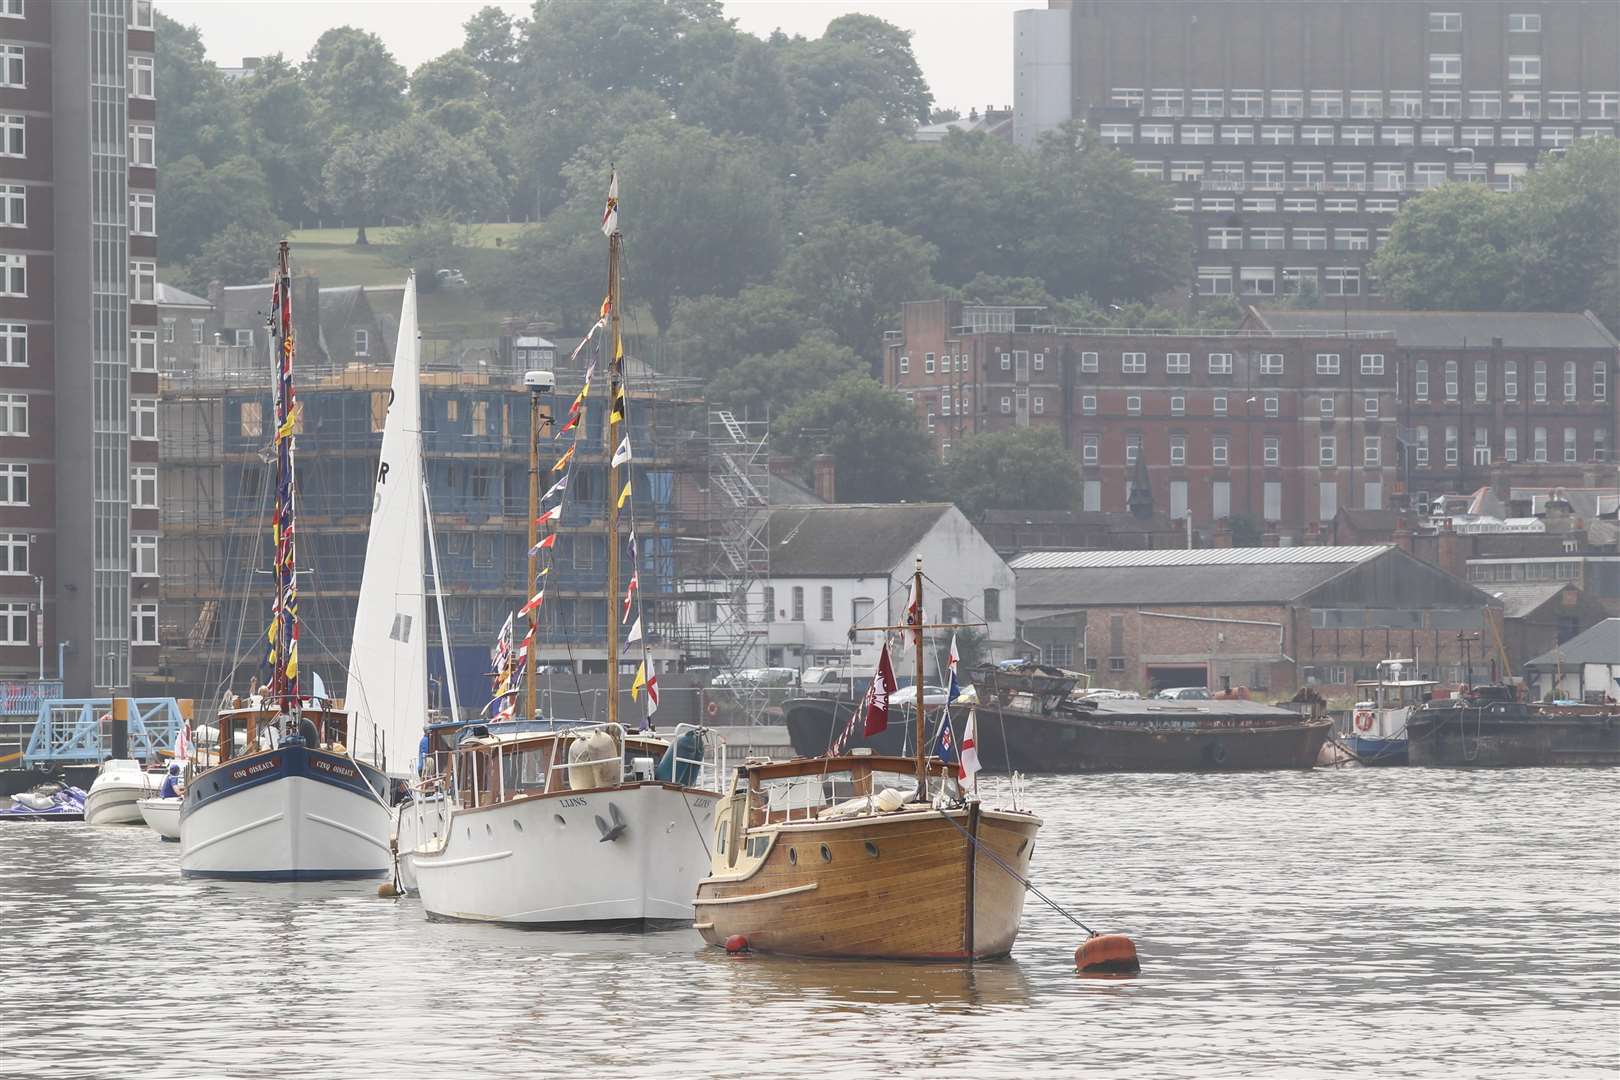 Boats at the Medway River Festival. Picture: John Westhrop